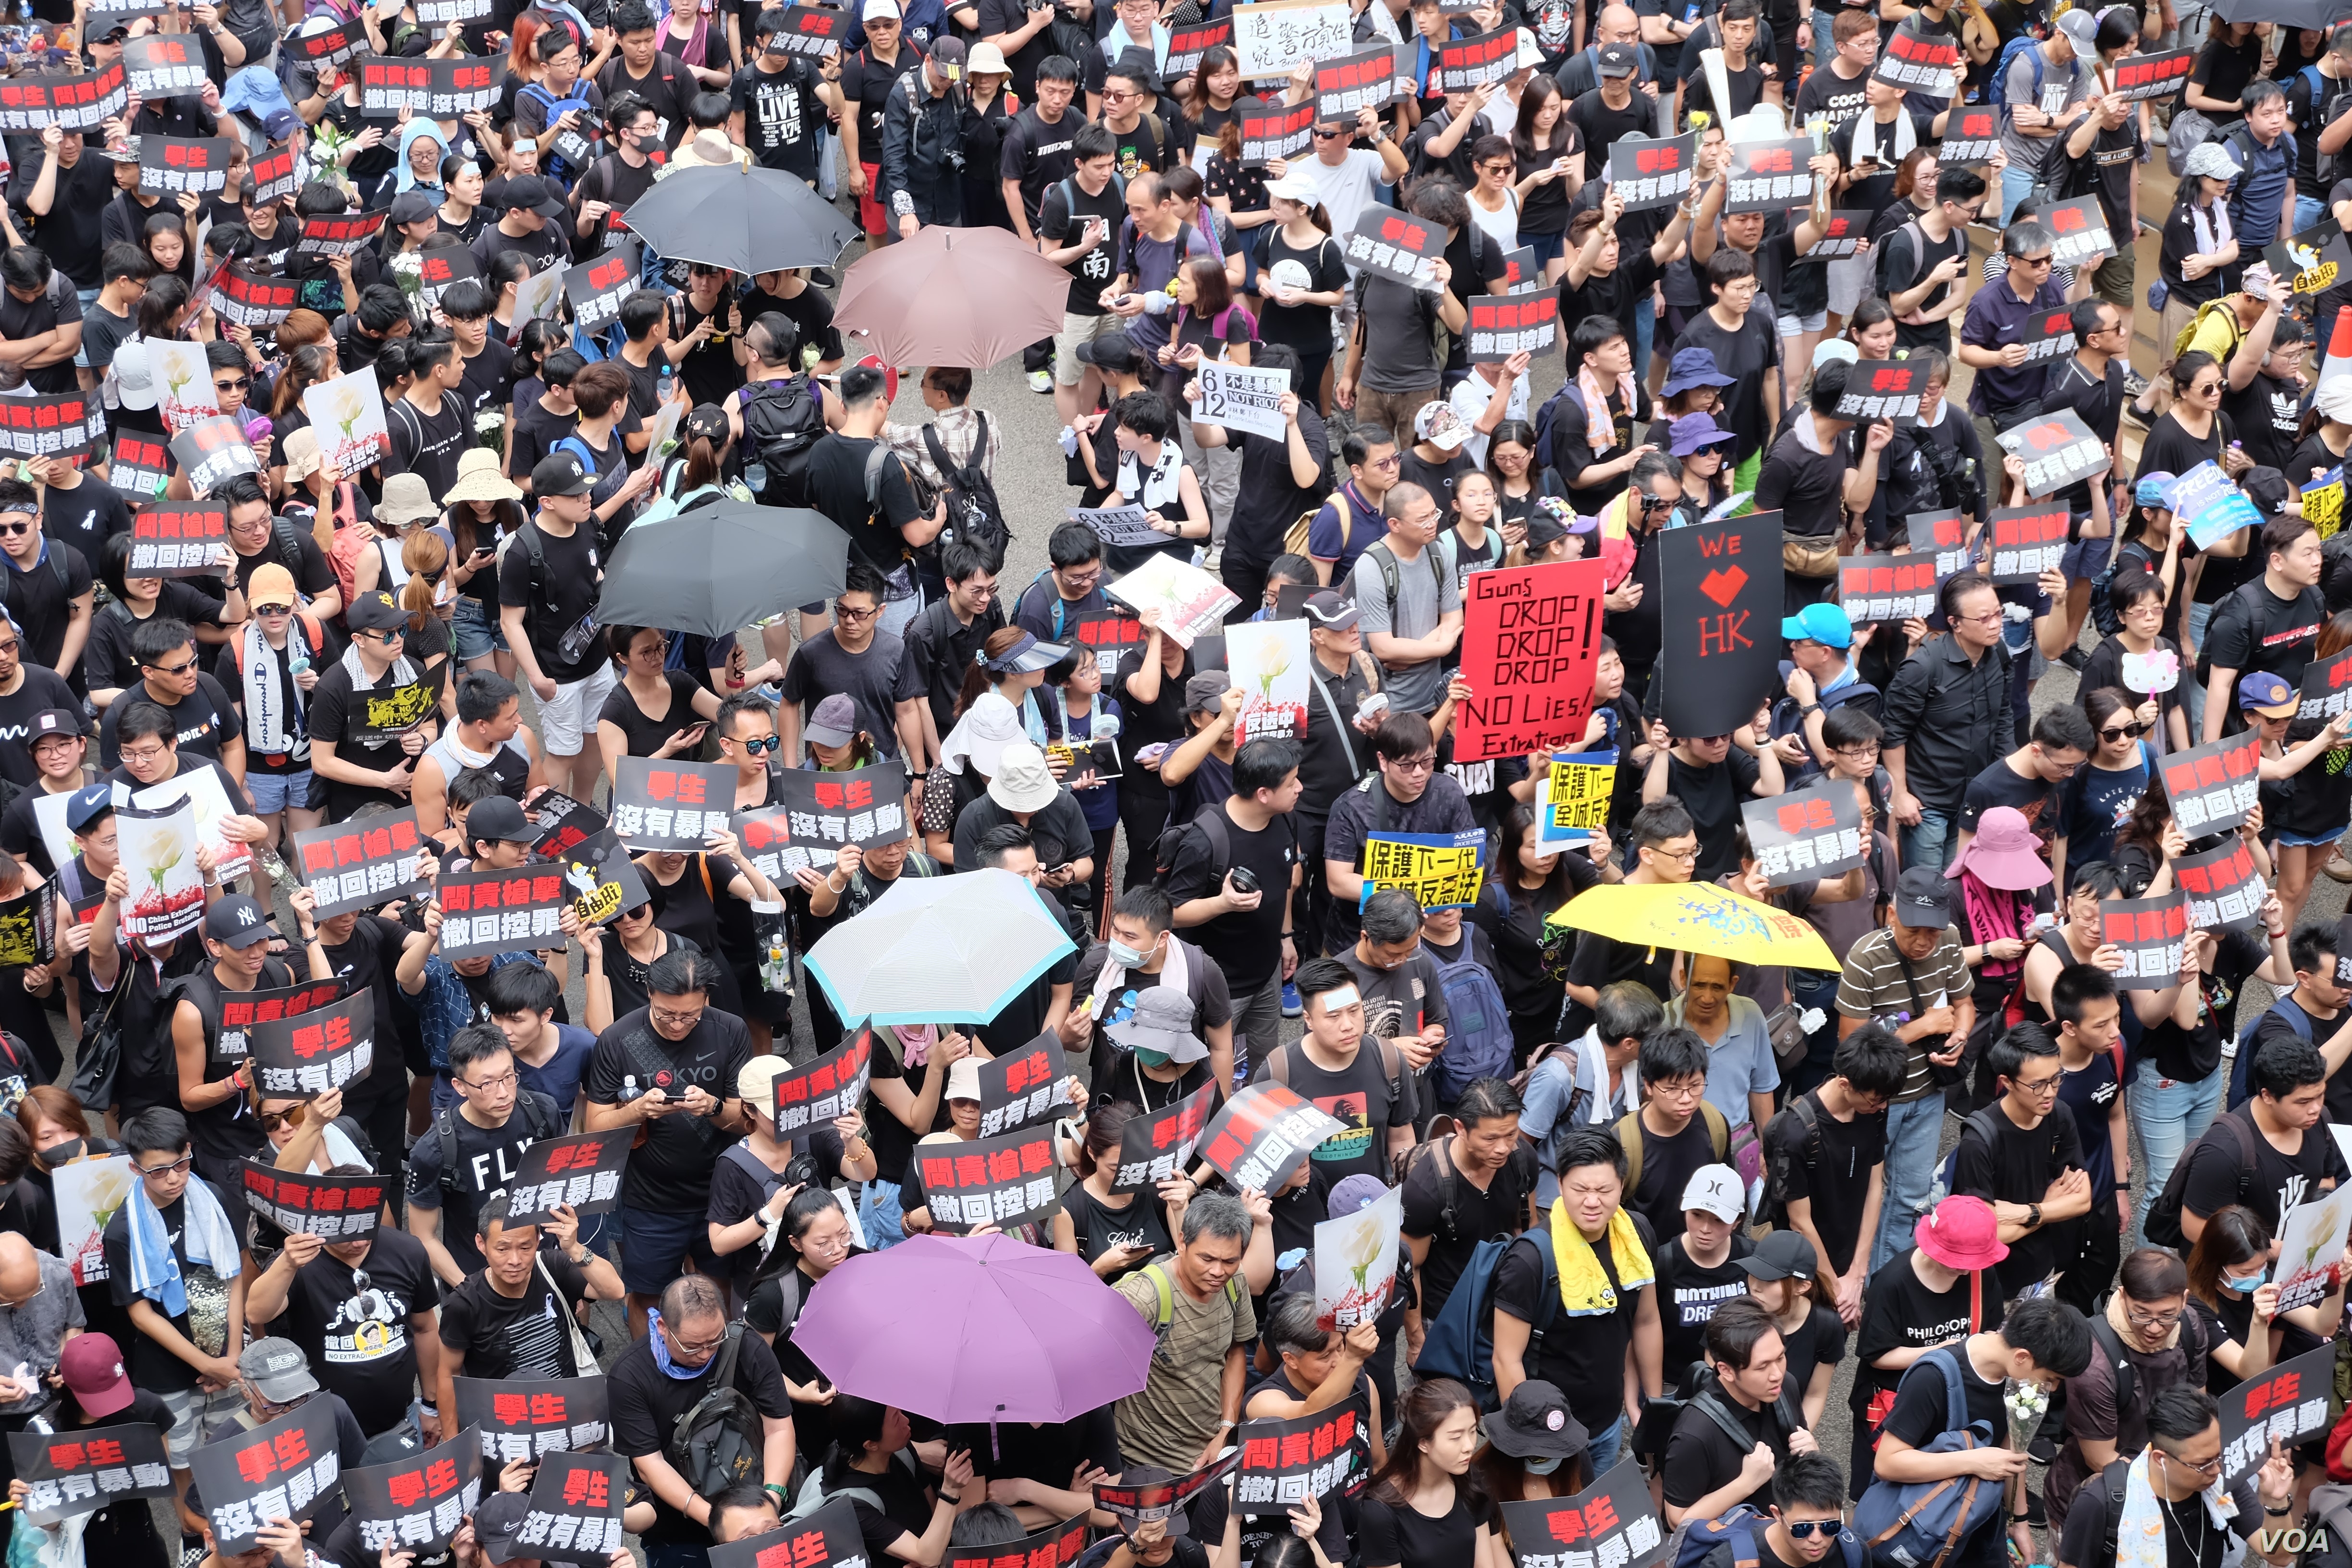 https://www.scmp.com/news/hong-kong/law-and-crime/article/3031696/hong-kong-protests-hundreds-take-streets-second-day